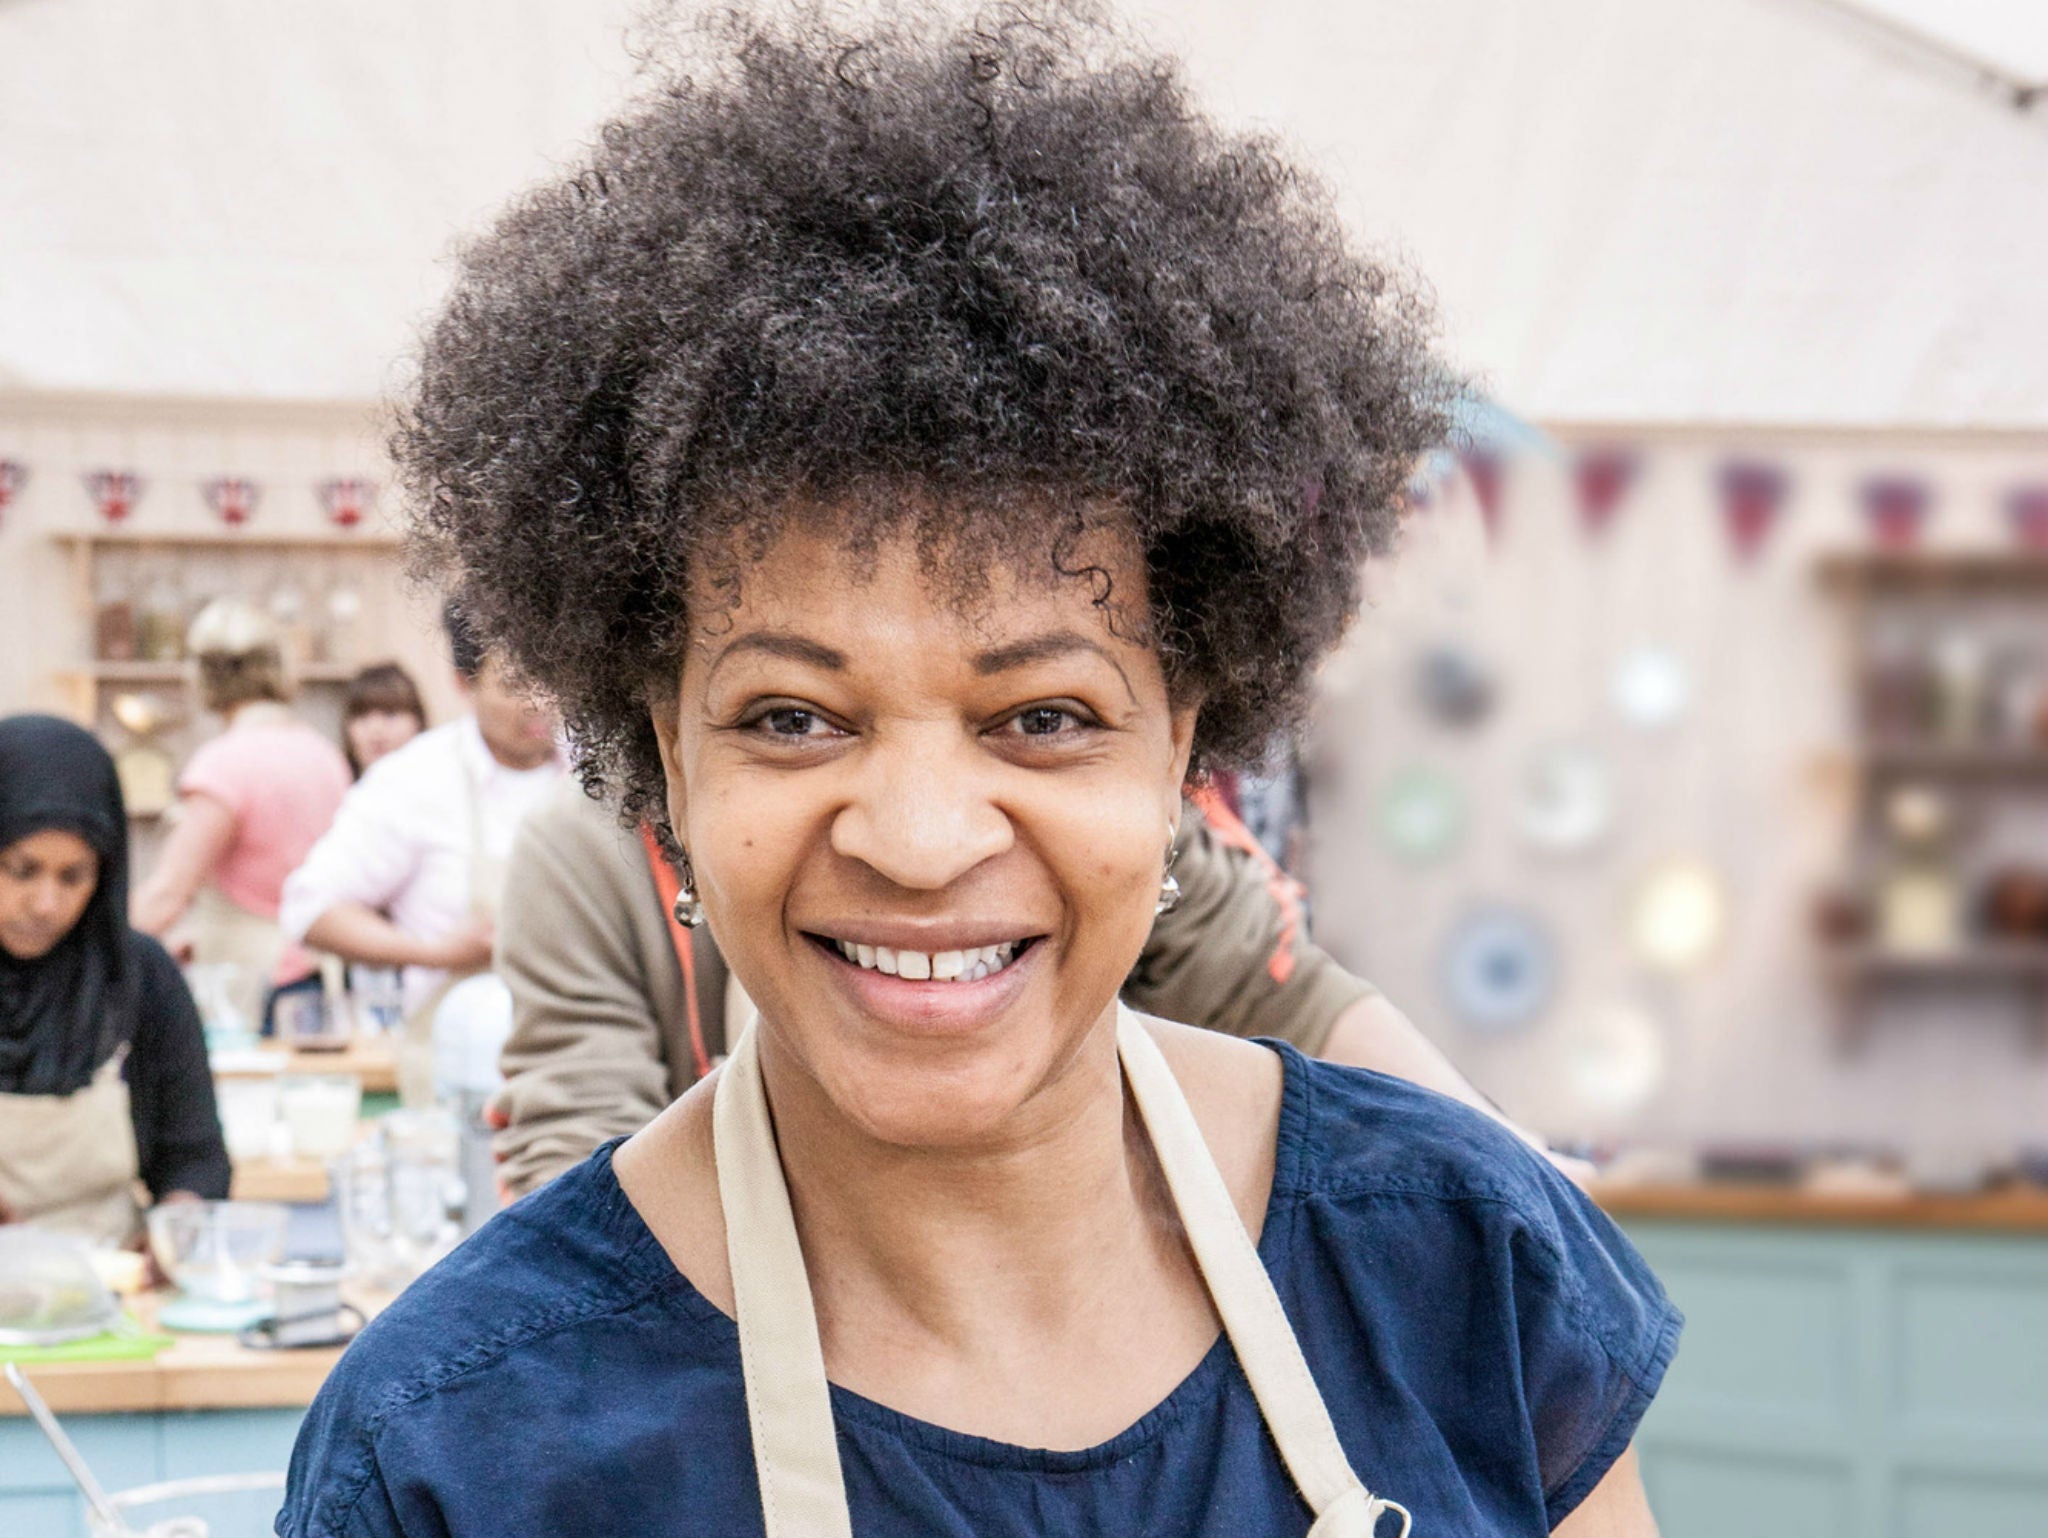 Dorret Conway became the third person to leave the Bake Off tent